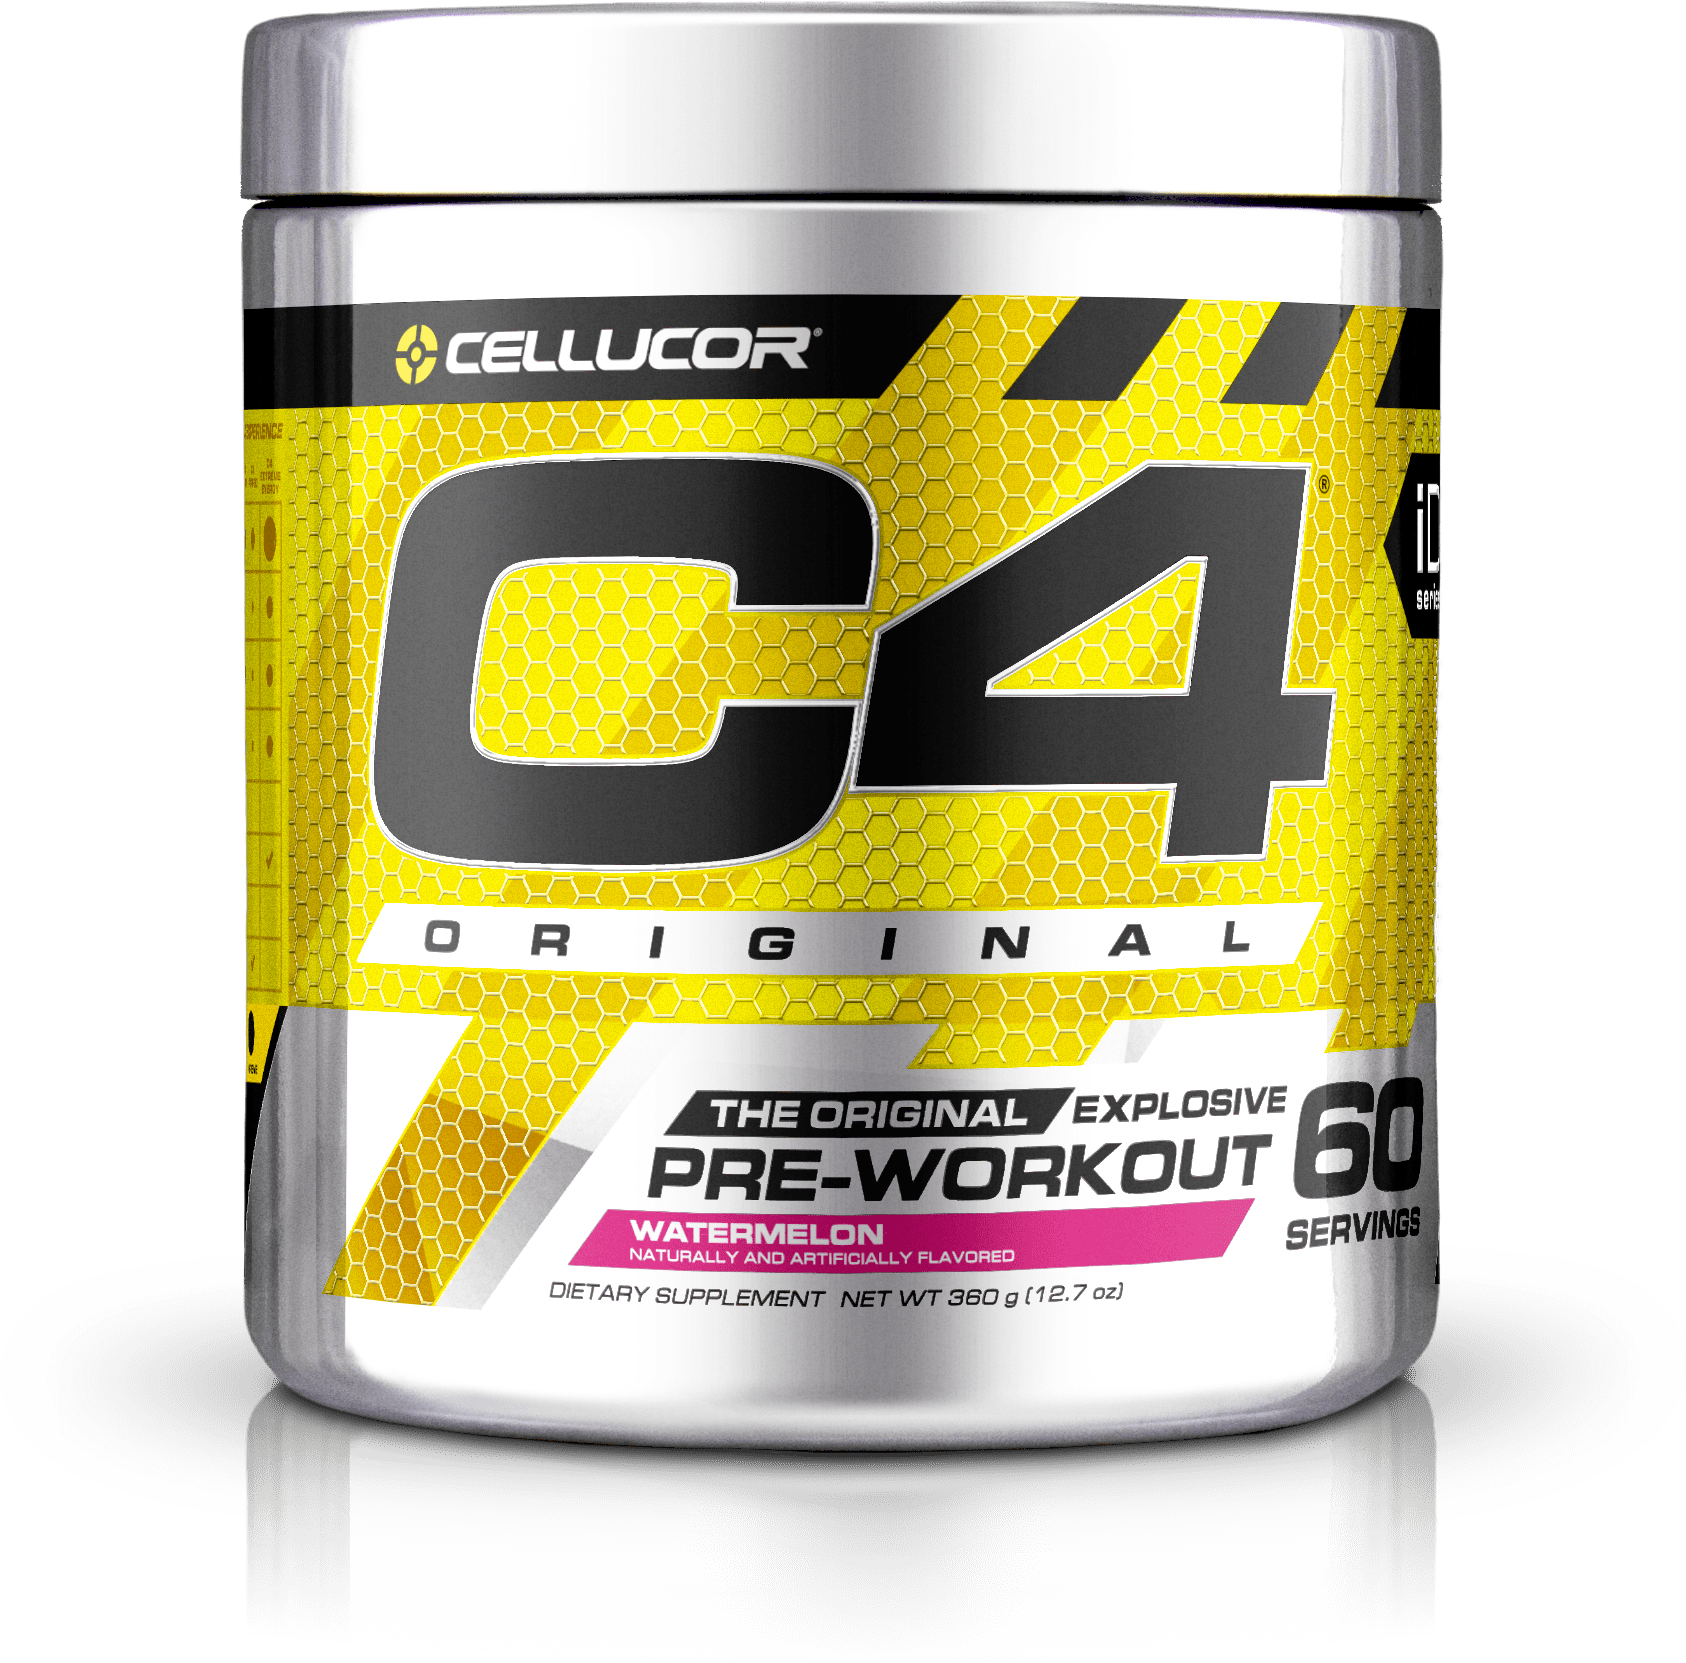 30 Minute Is Caffeine Free Pre Workout Safe for Build Muscle